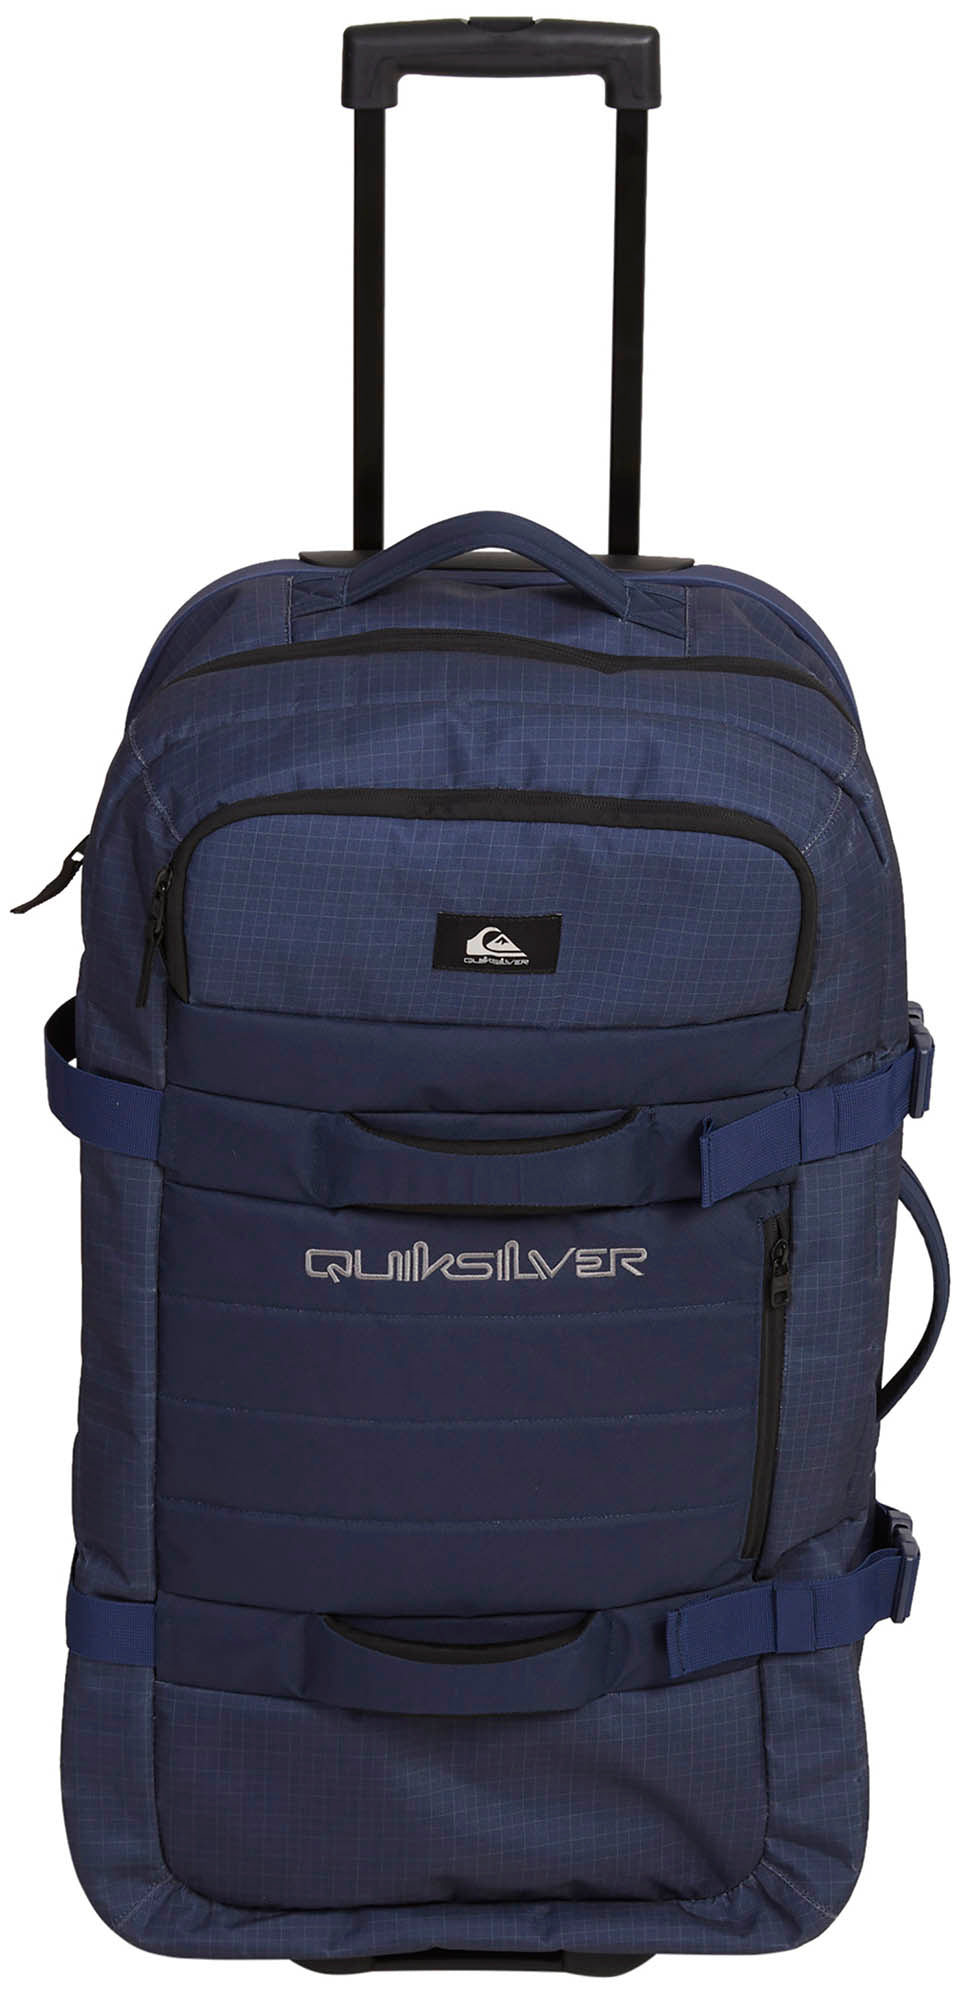 Academy New – Suitcase Naval - Reach thebackpacker Quiksilver 100L